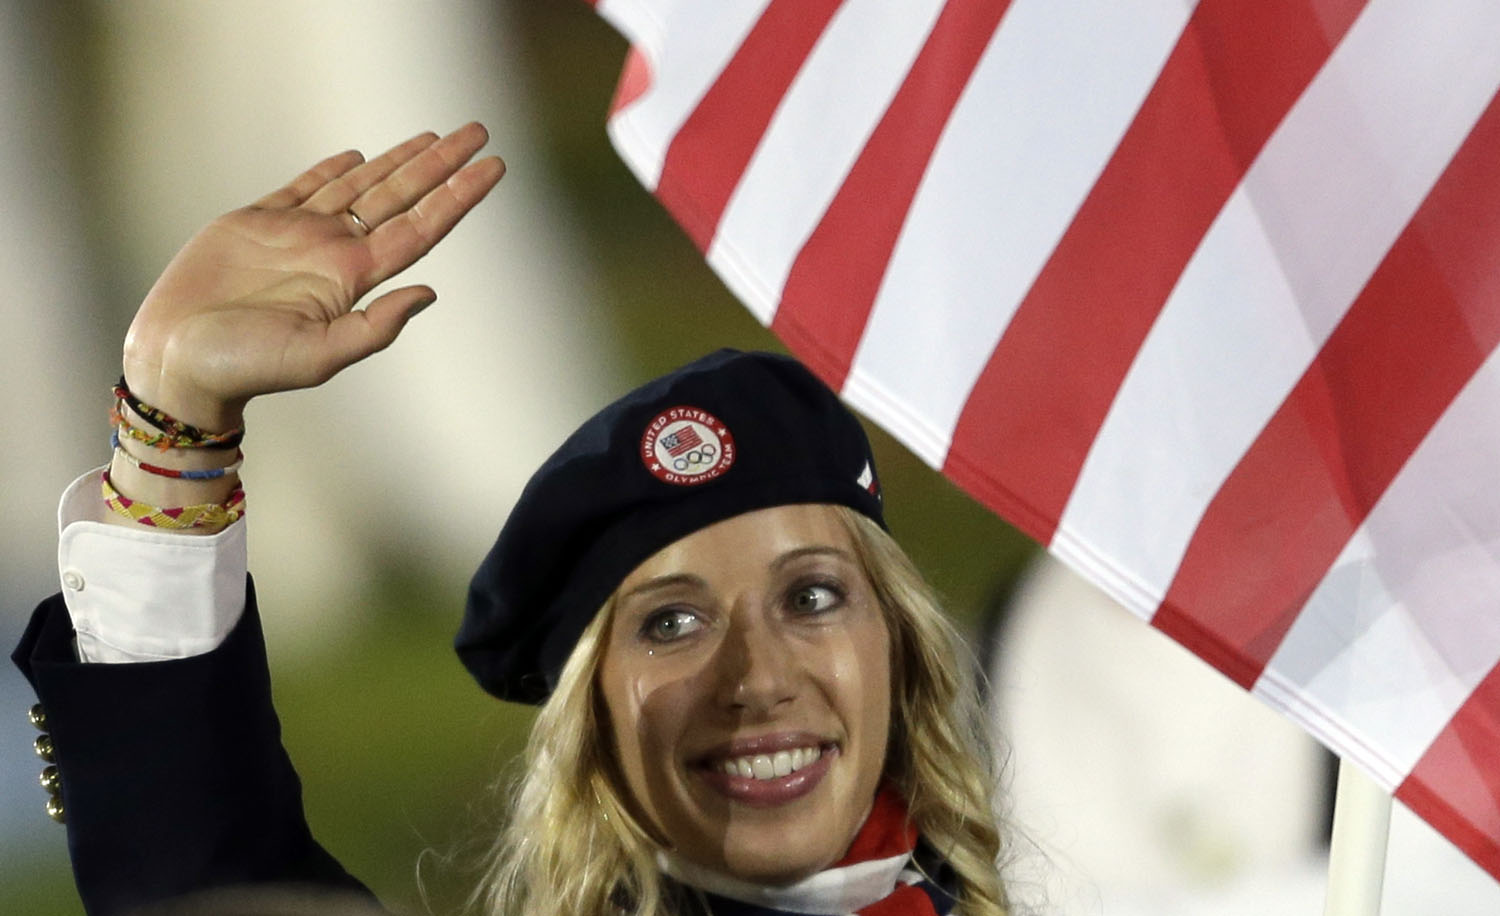 United States's fencer Mariel Zagunis carries the flag during the Opening Ceremony at the 2012 Summer Olympics, Friday, July 27, 2012, in London.